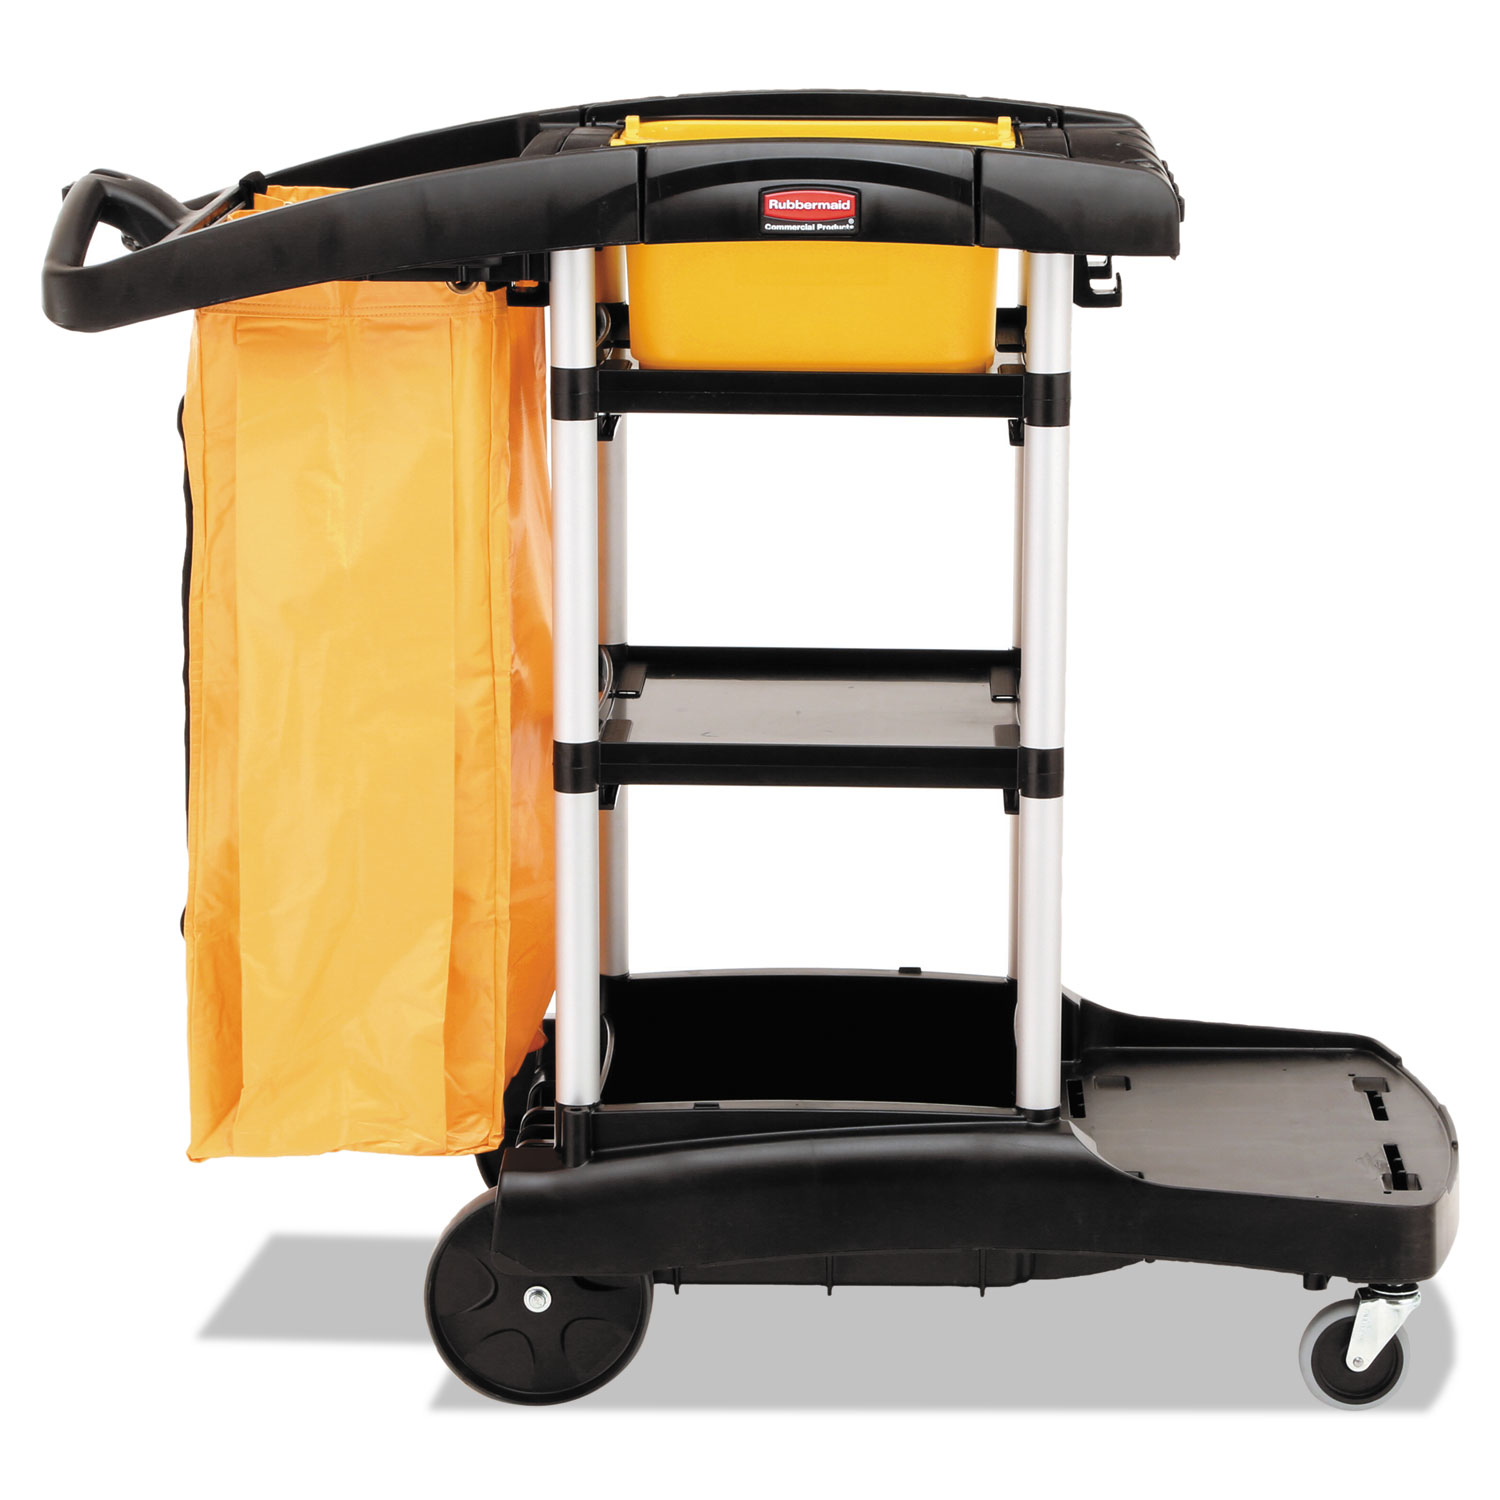  Rubbermaid Commercial FG9T7200BLA High Capacity Cleaning Cart, 21.75w x 49.75d x 38.38h, Black (RCP9T7200BK) 